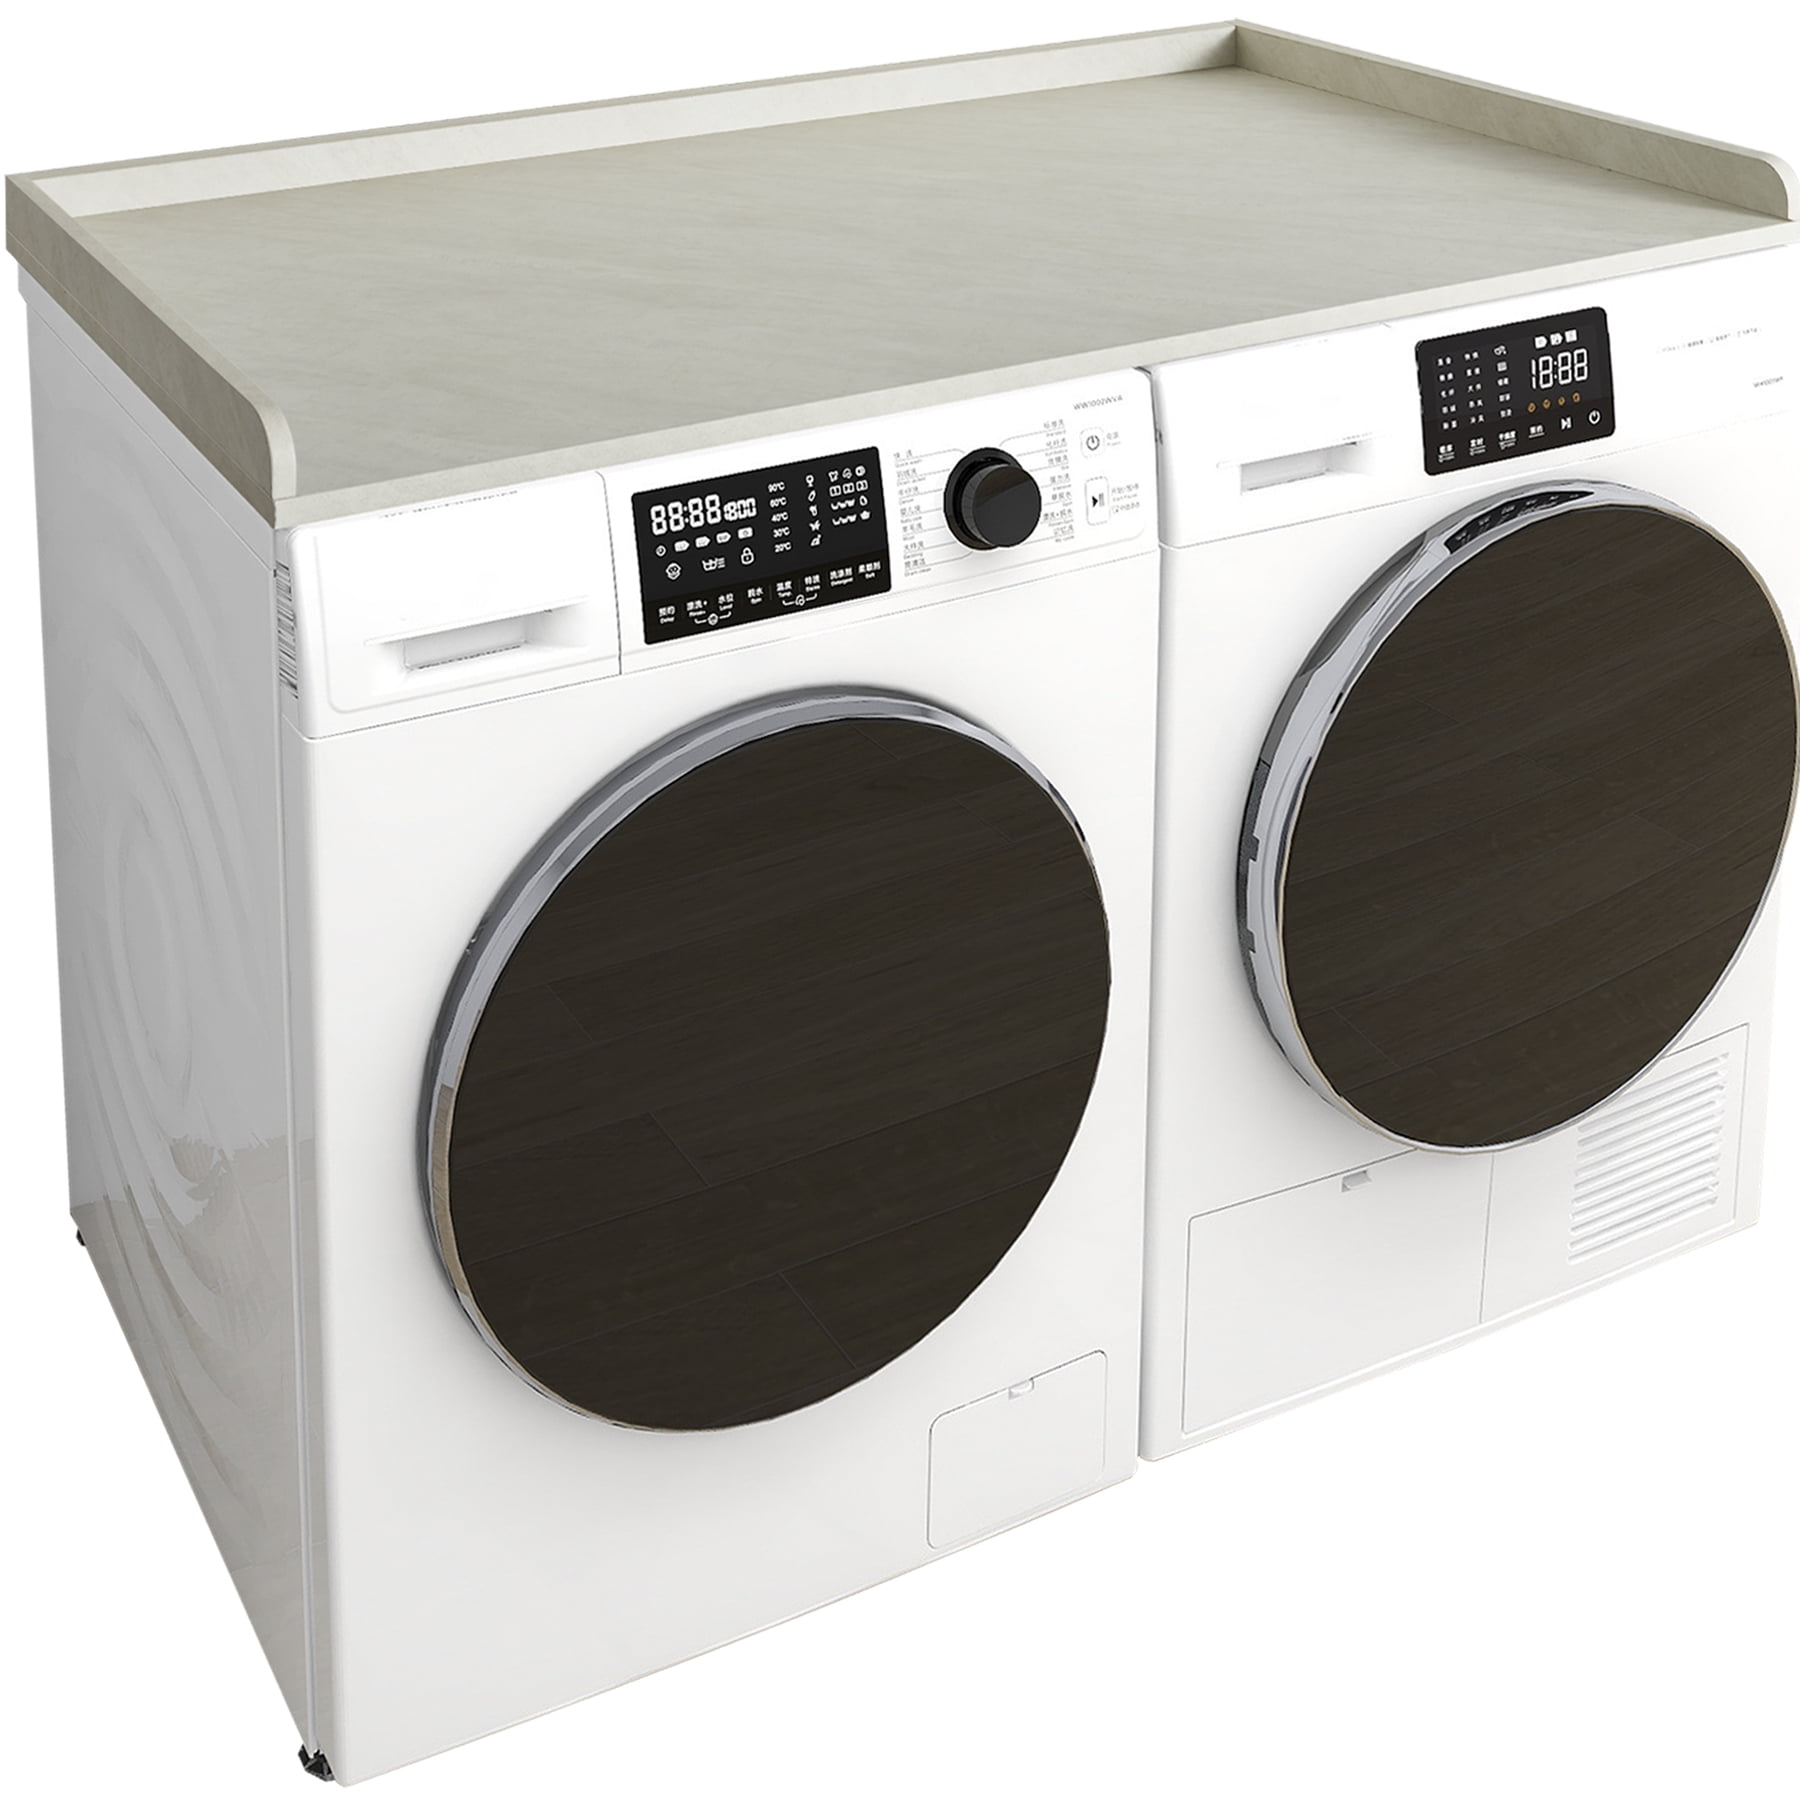 Washer / Dryer Countertop 3 1/2 Thick 